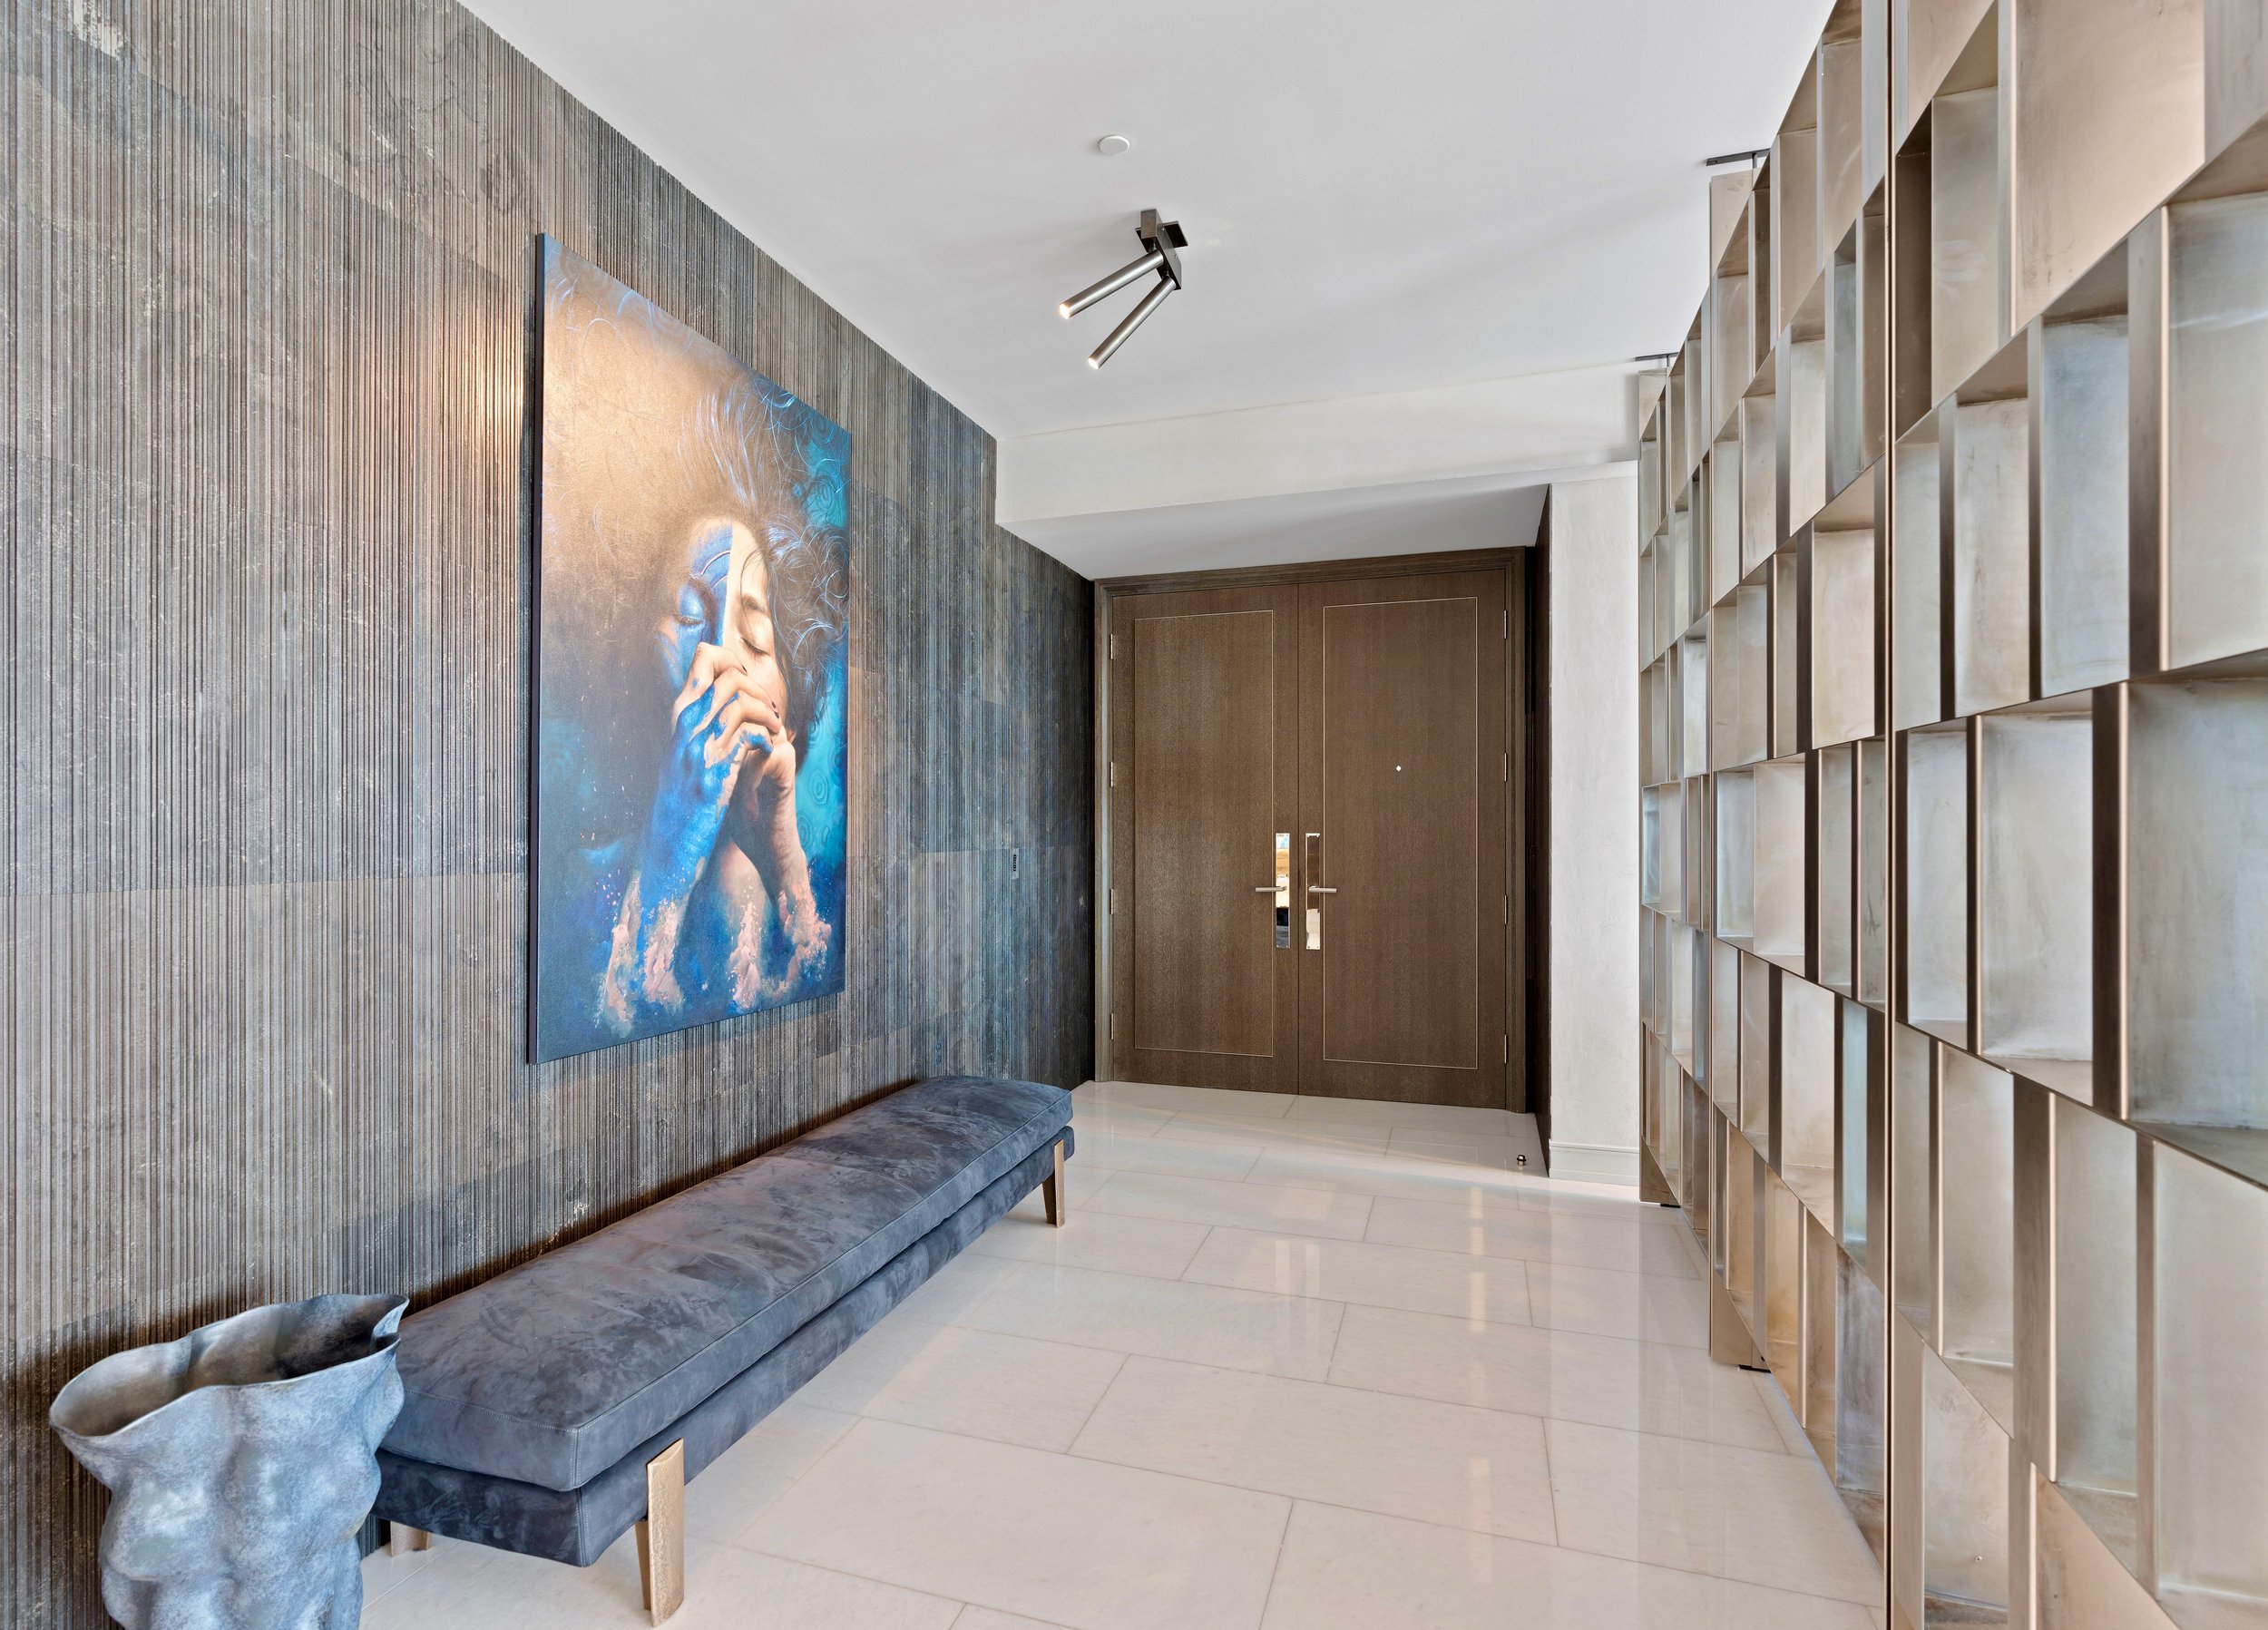 Step Inside An Ultra-Luxe Condo At The Bristol In West Palm Beach Asking $23.9 Million, Over $4,600 Per Square Foot 15.jpg